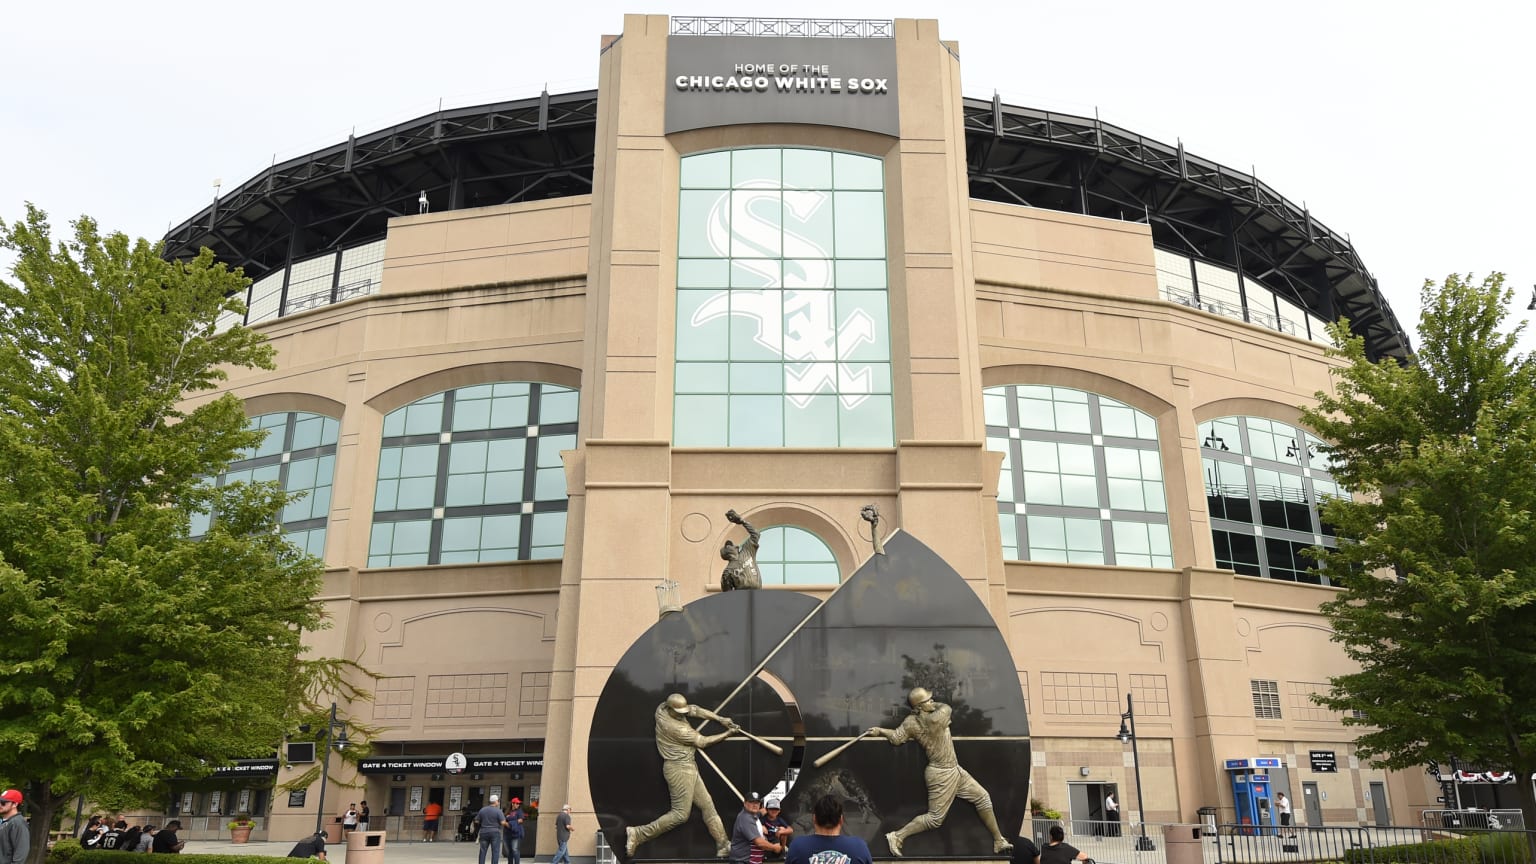 Guaranteed Rate Field: History, Capacity, Events & Significance